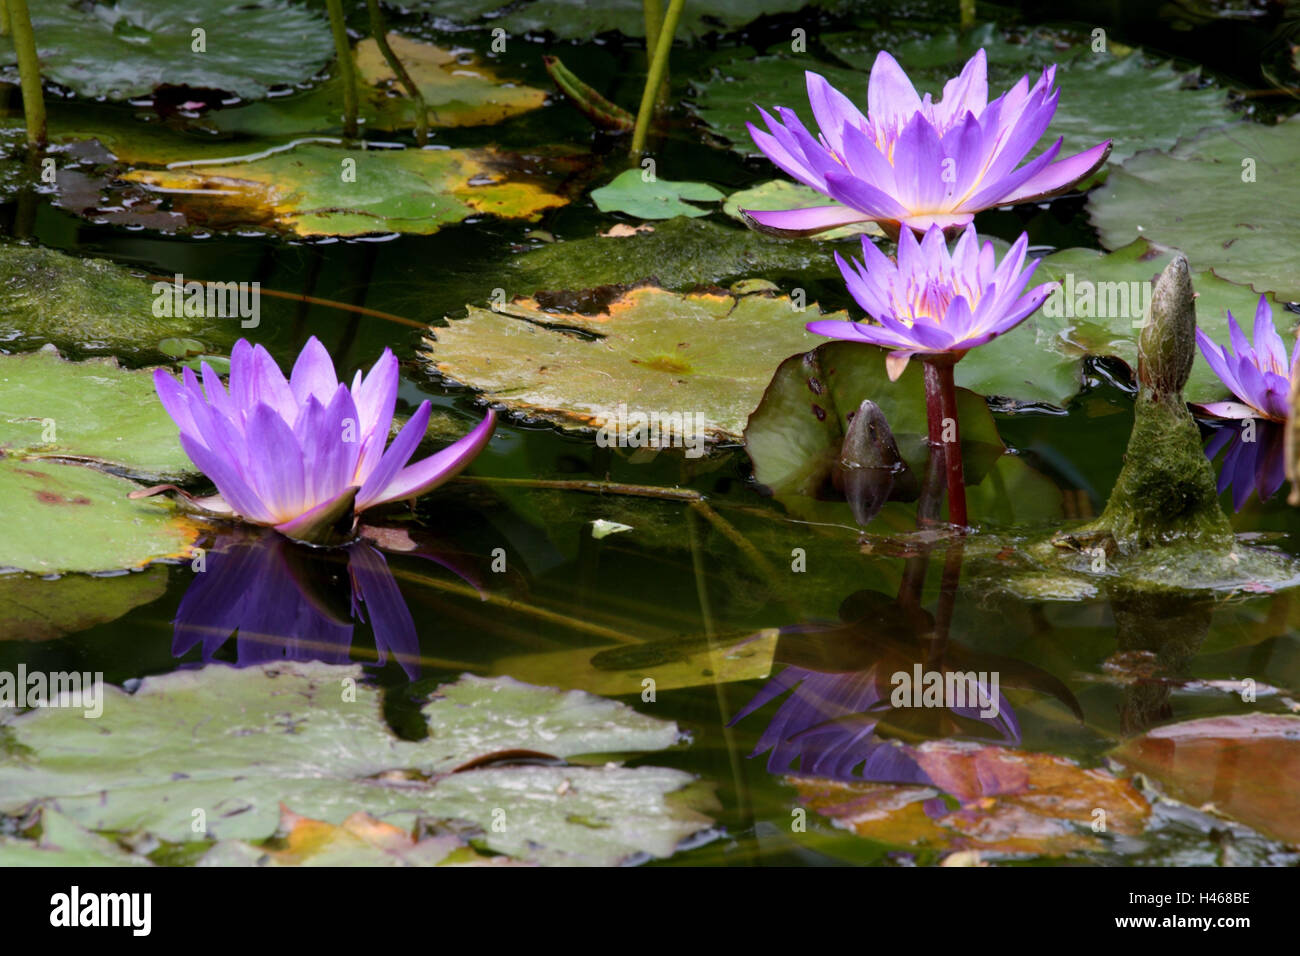 Pond, water lilies, Stock Photo